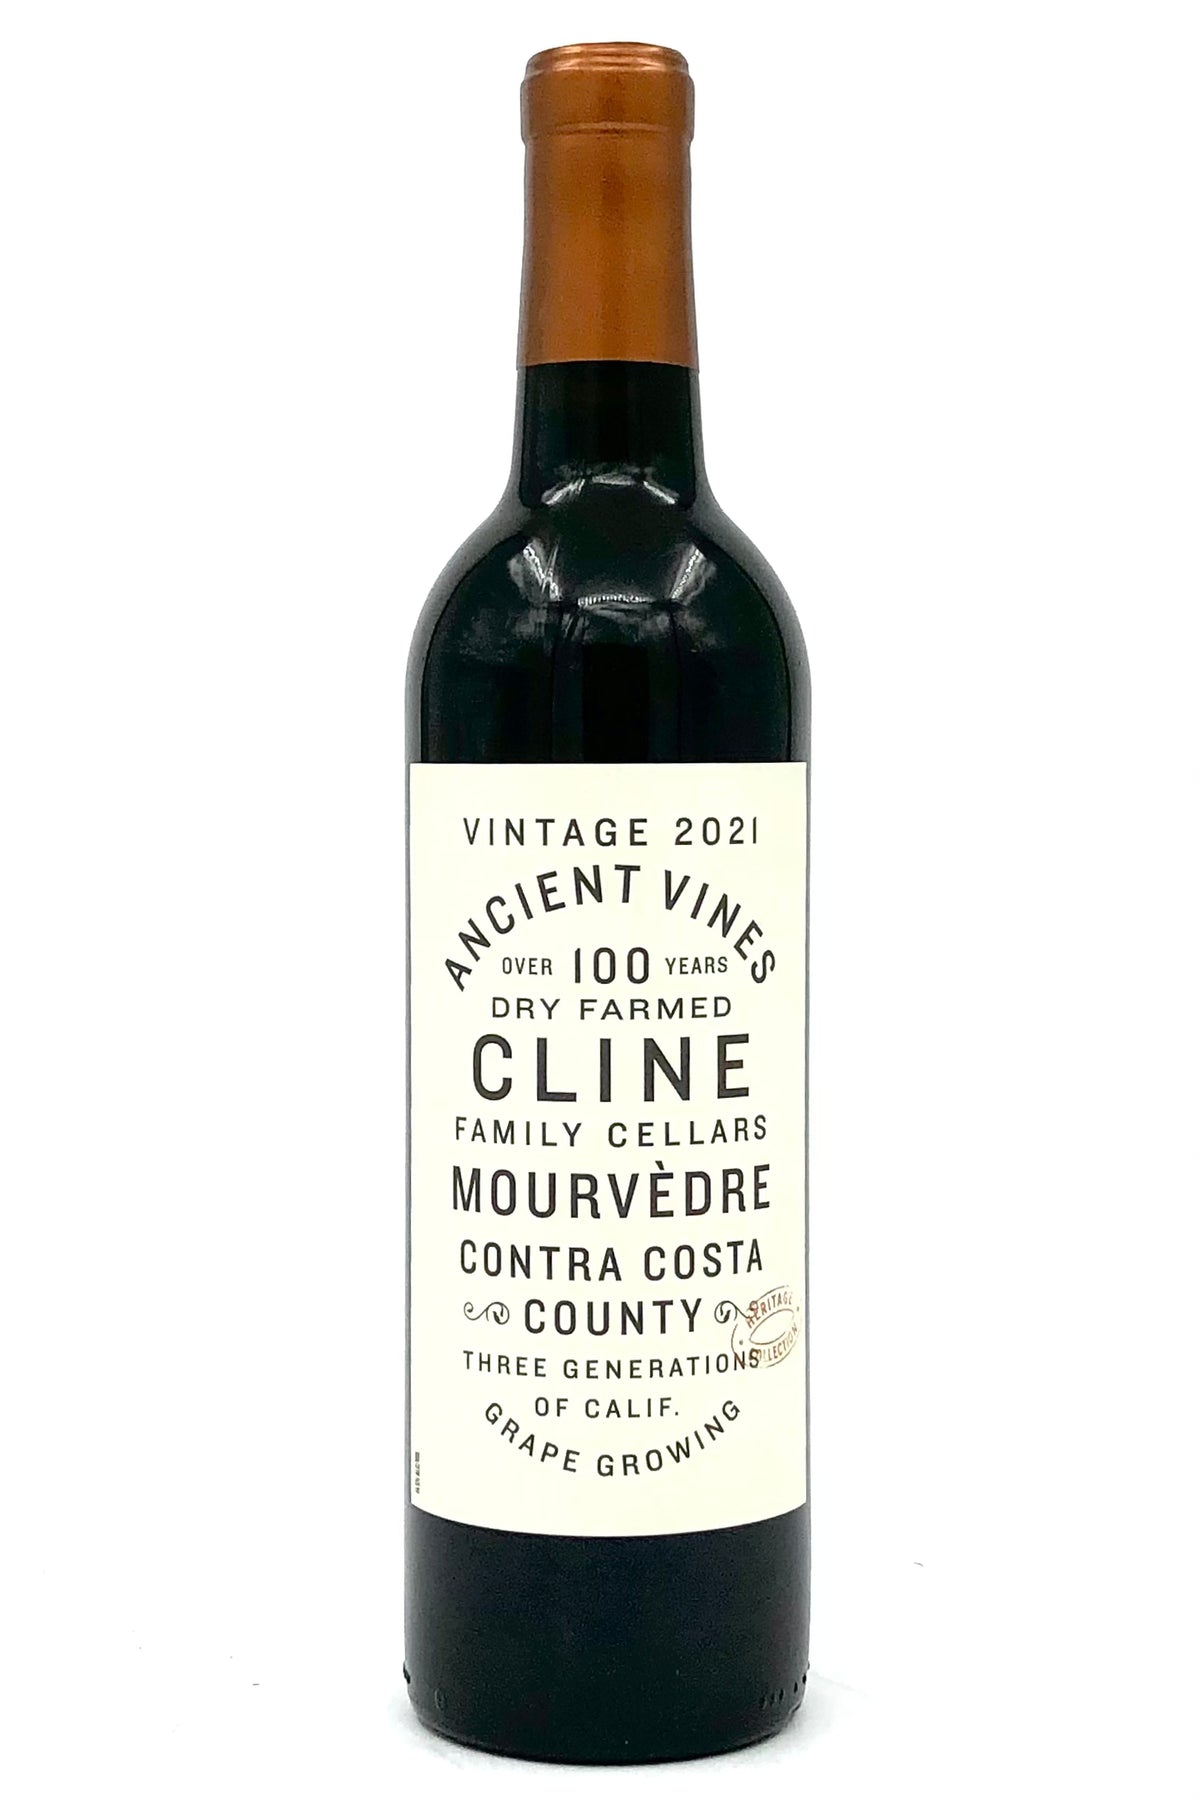 Cline 2021 Mourvedre Ancient Vines Contra Costa County